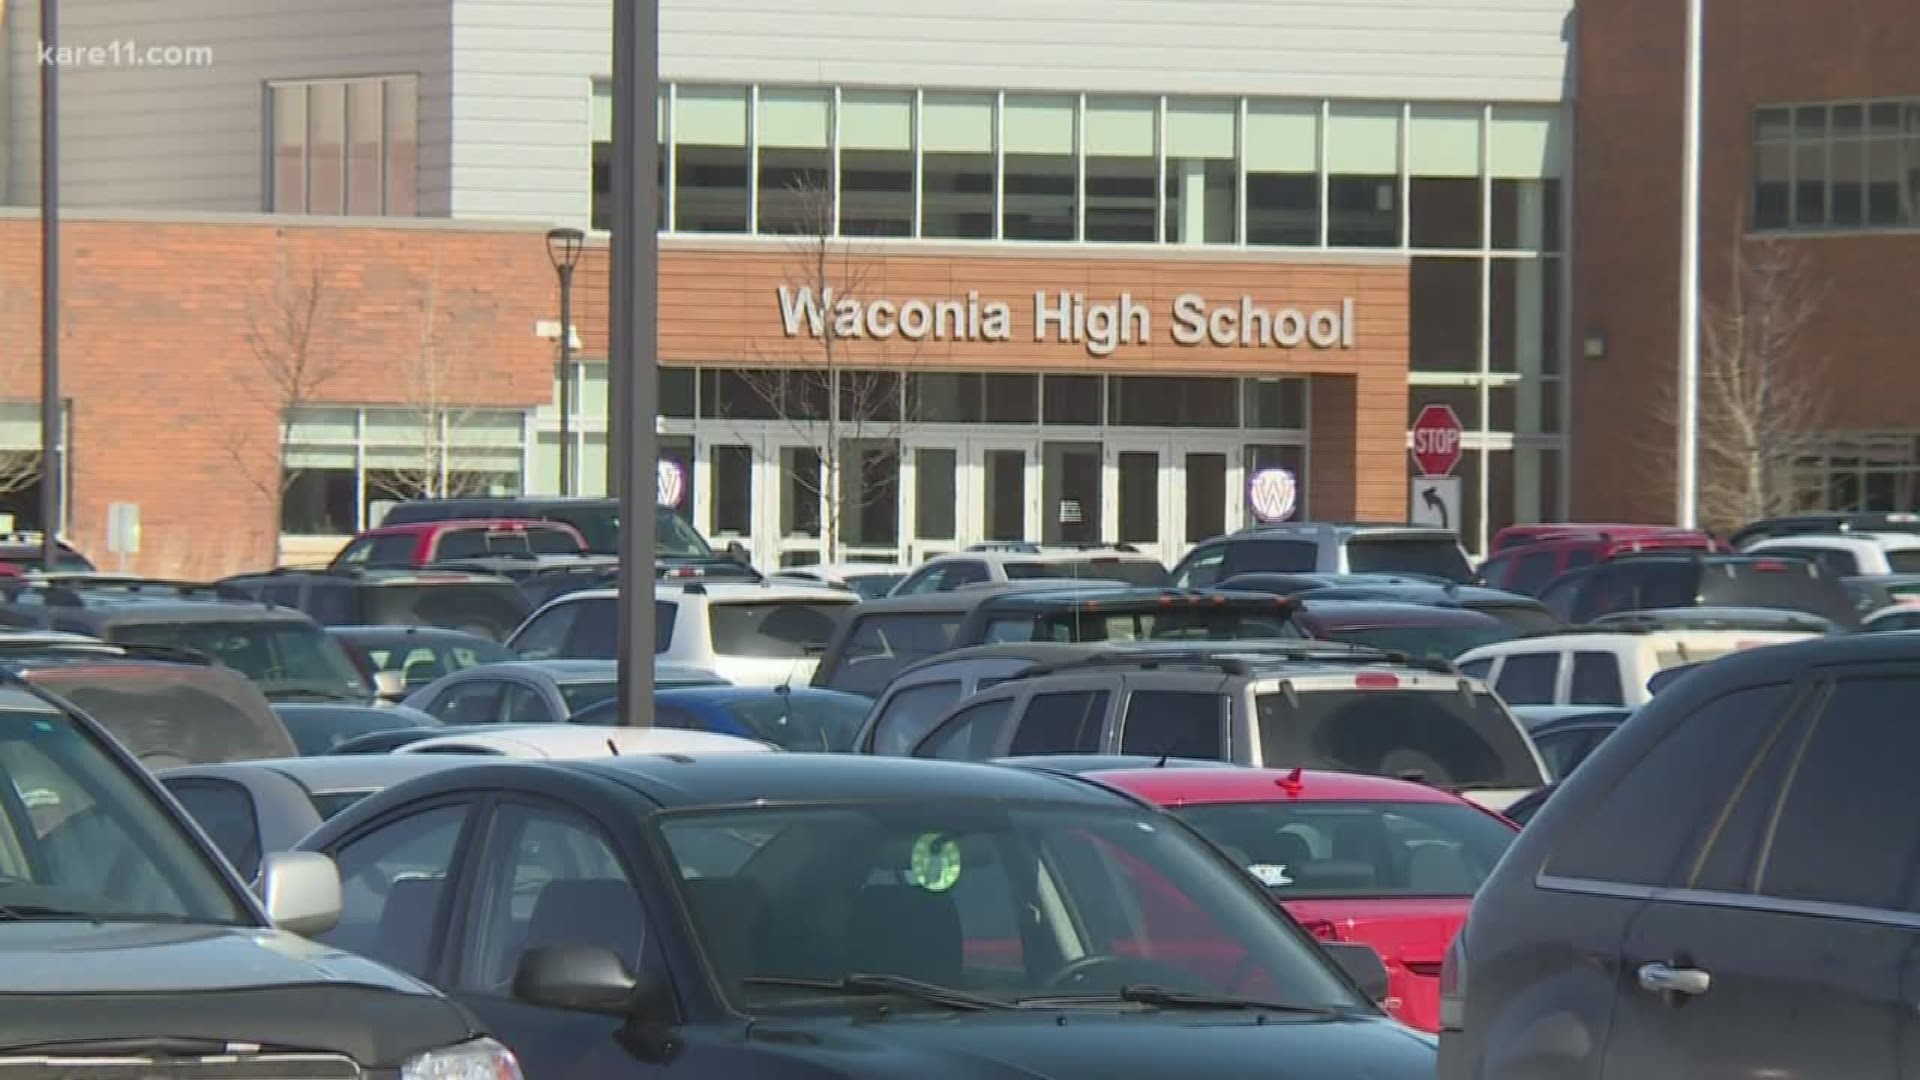 A Waconia high school coach is under investigation after a complaint was filed by a parent claiming her son was given unprescribed drugs to treat a skin infection.